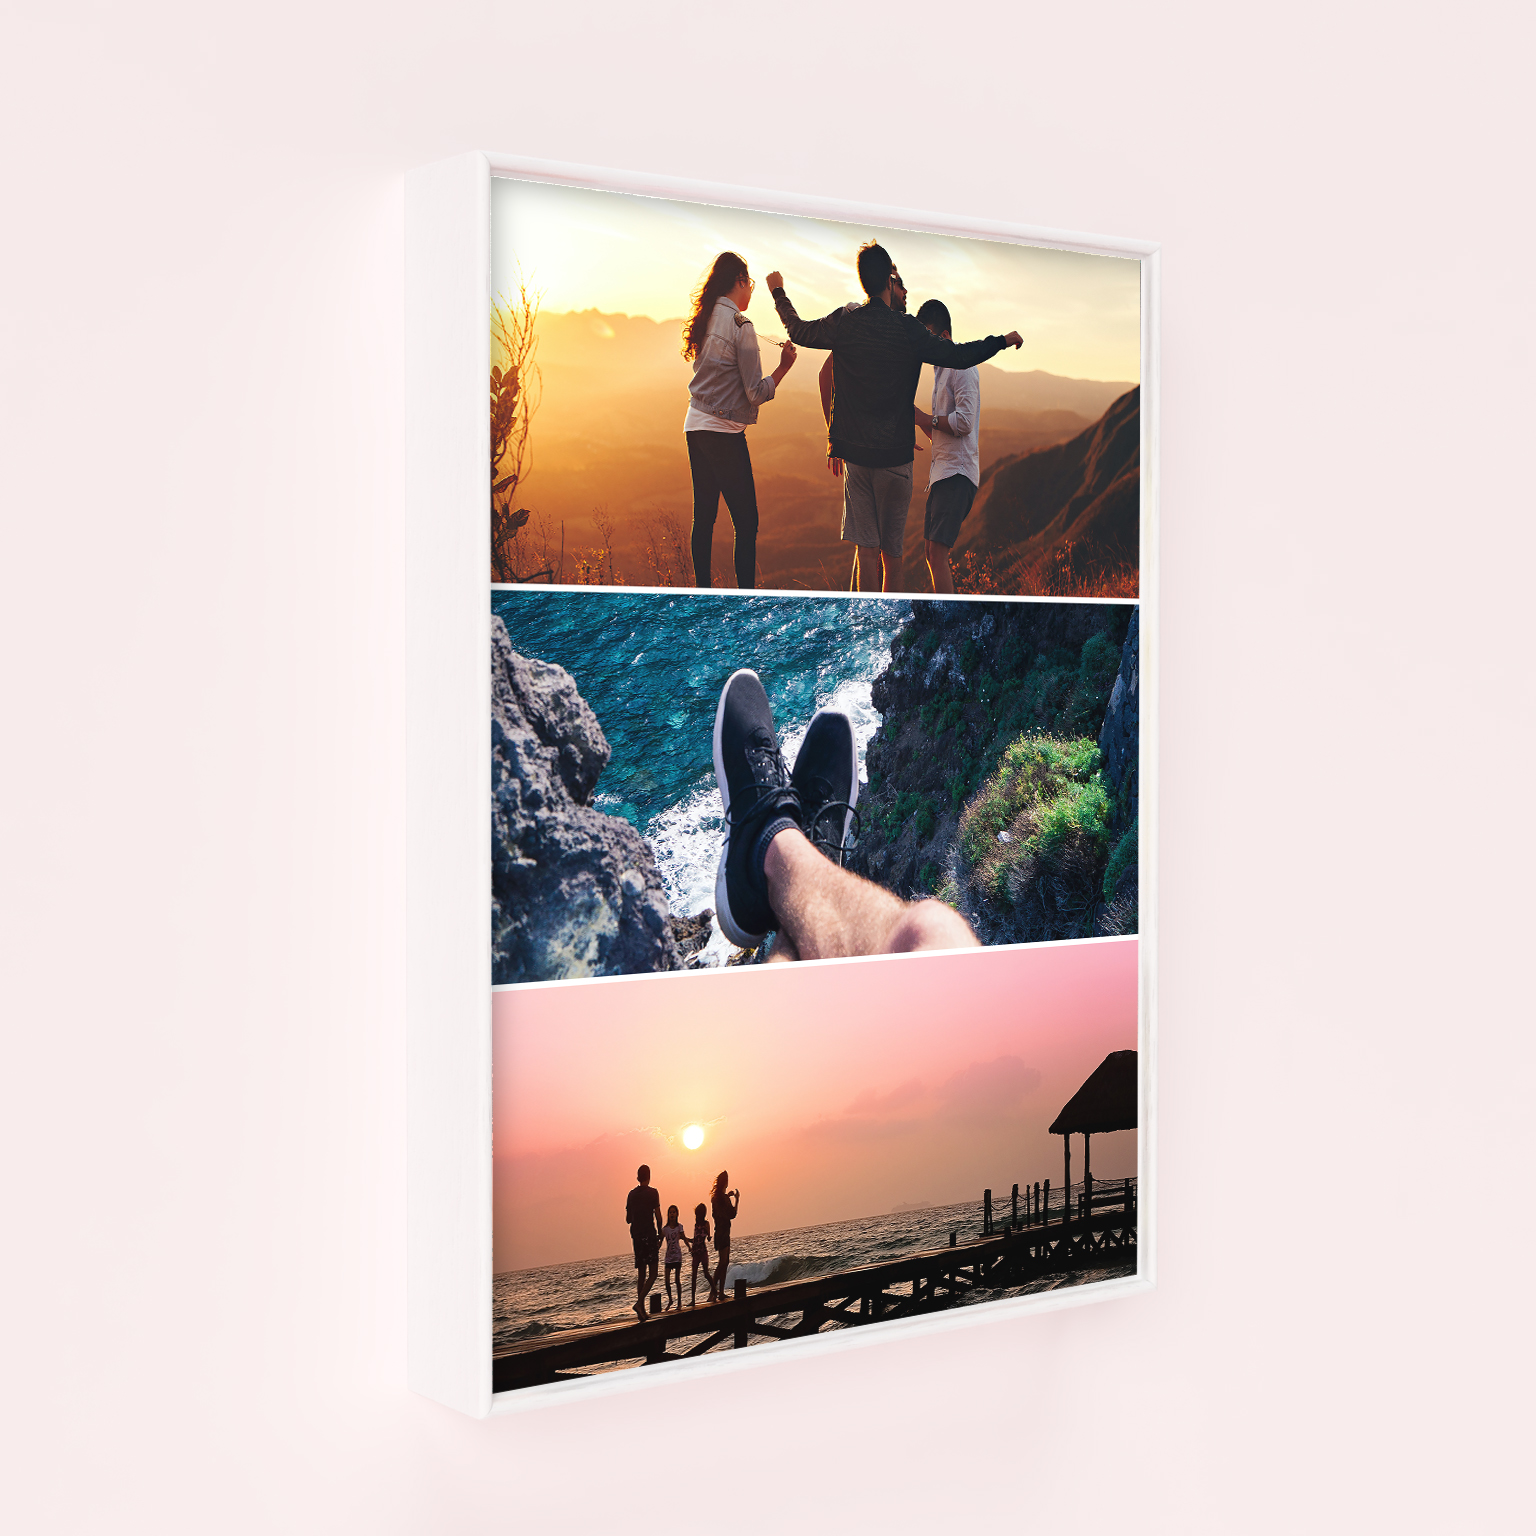 Vacation Bliss Framed Photo Canvas - Transform holiday memories into art with this portrait-oriented canvas featuring three photos. A unique and captivating keepsake to cherish the joy and beauty of your travels.